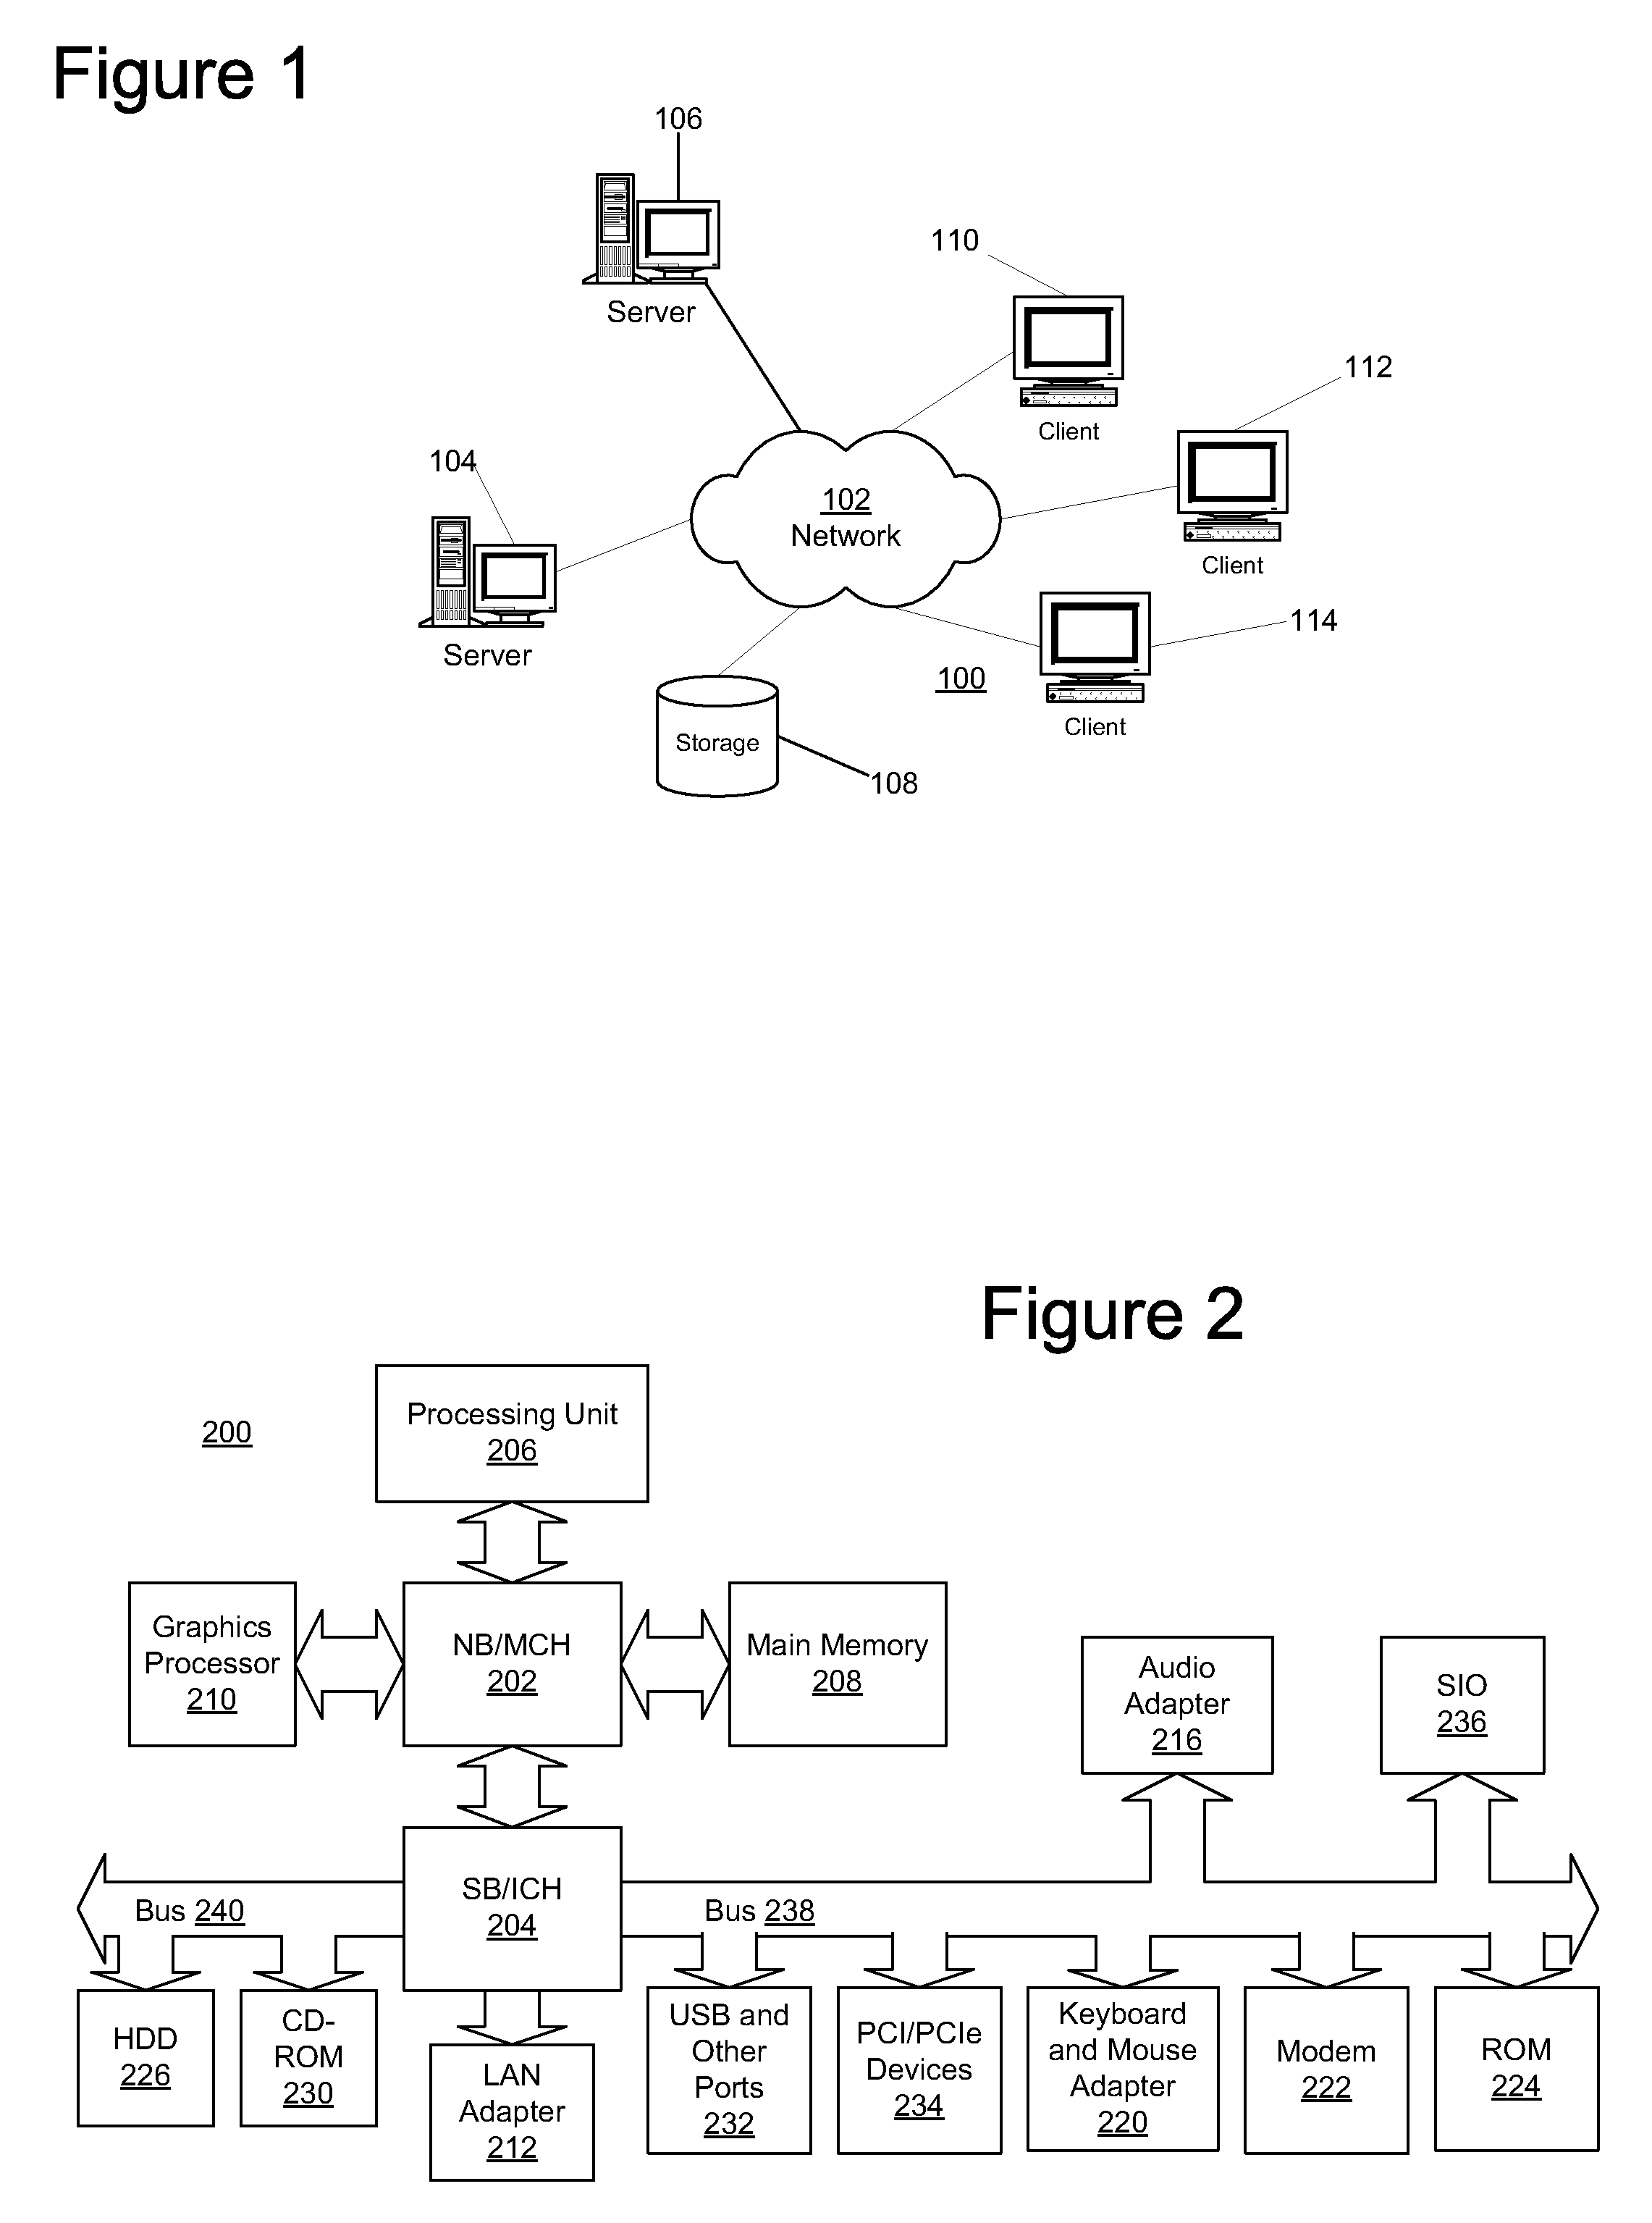 Method and apparatus for obtaining the absolute path name of an open file system object from its file descriptor